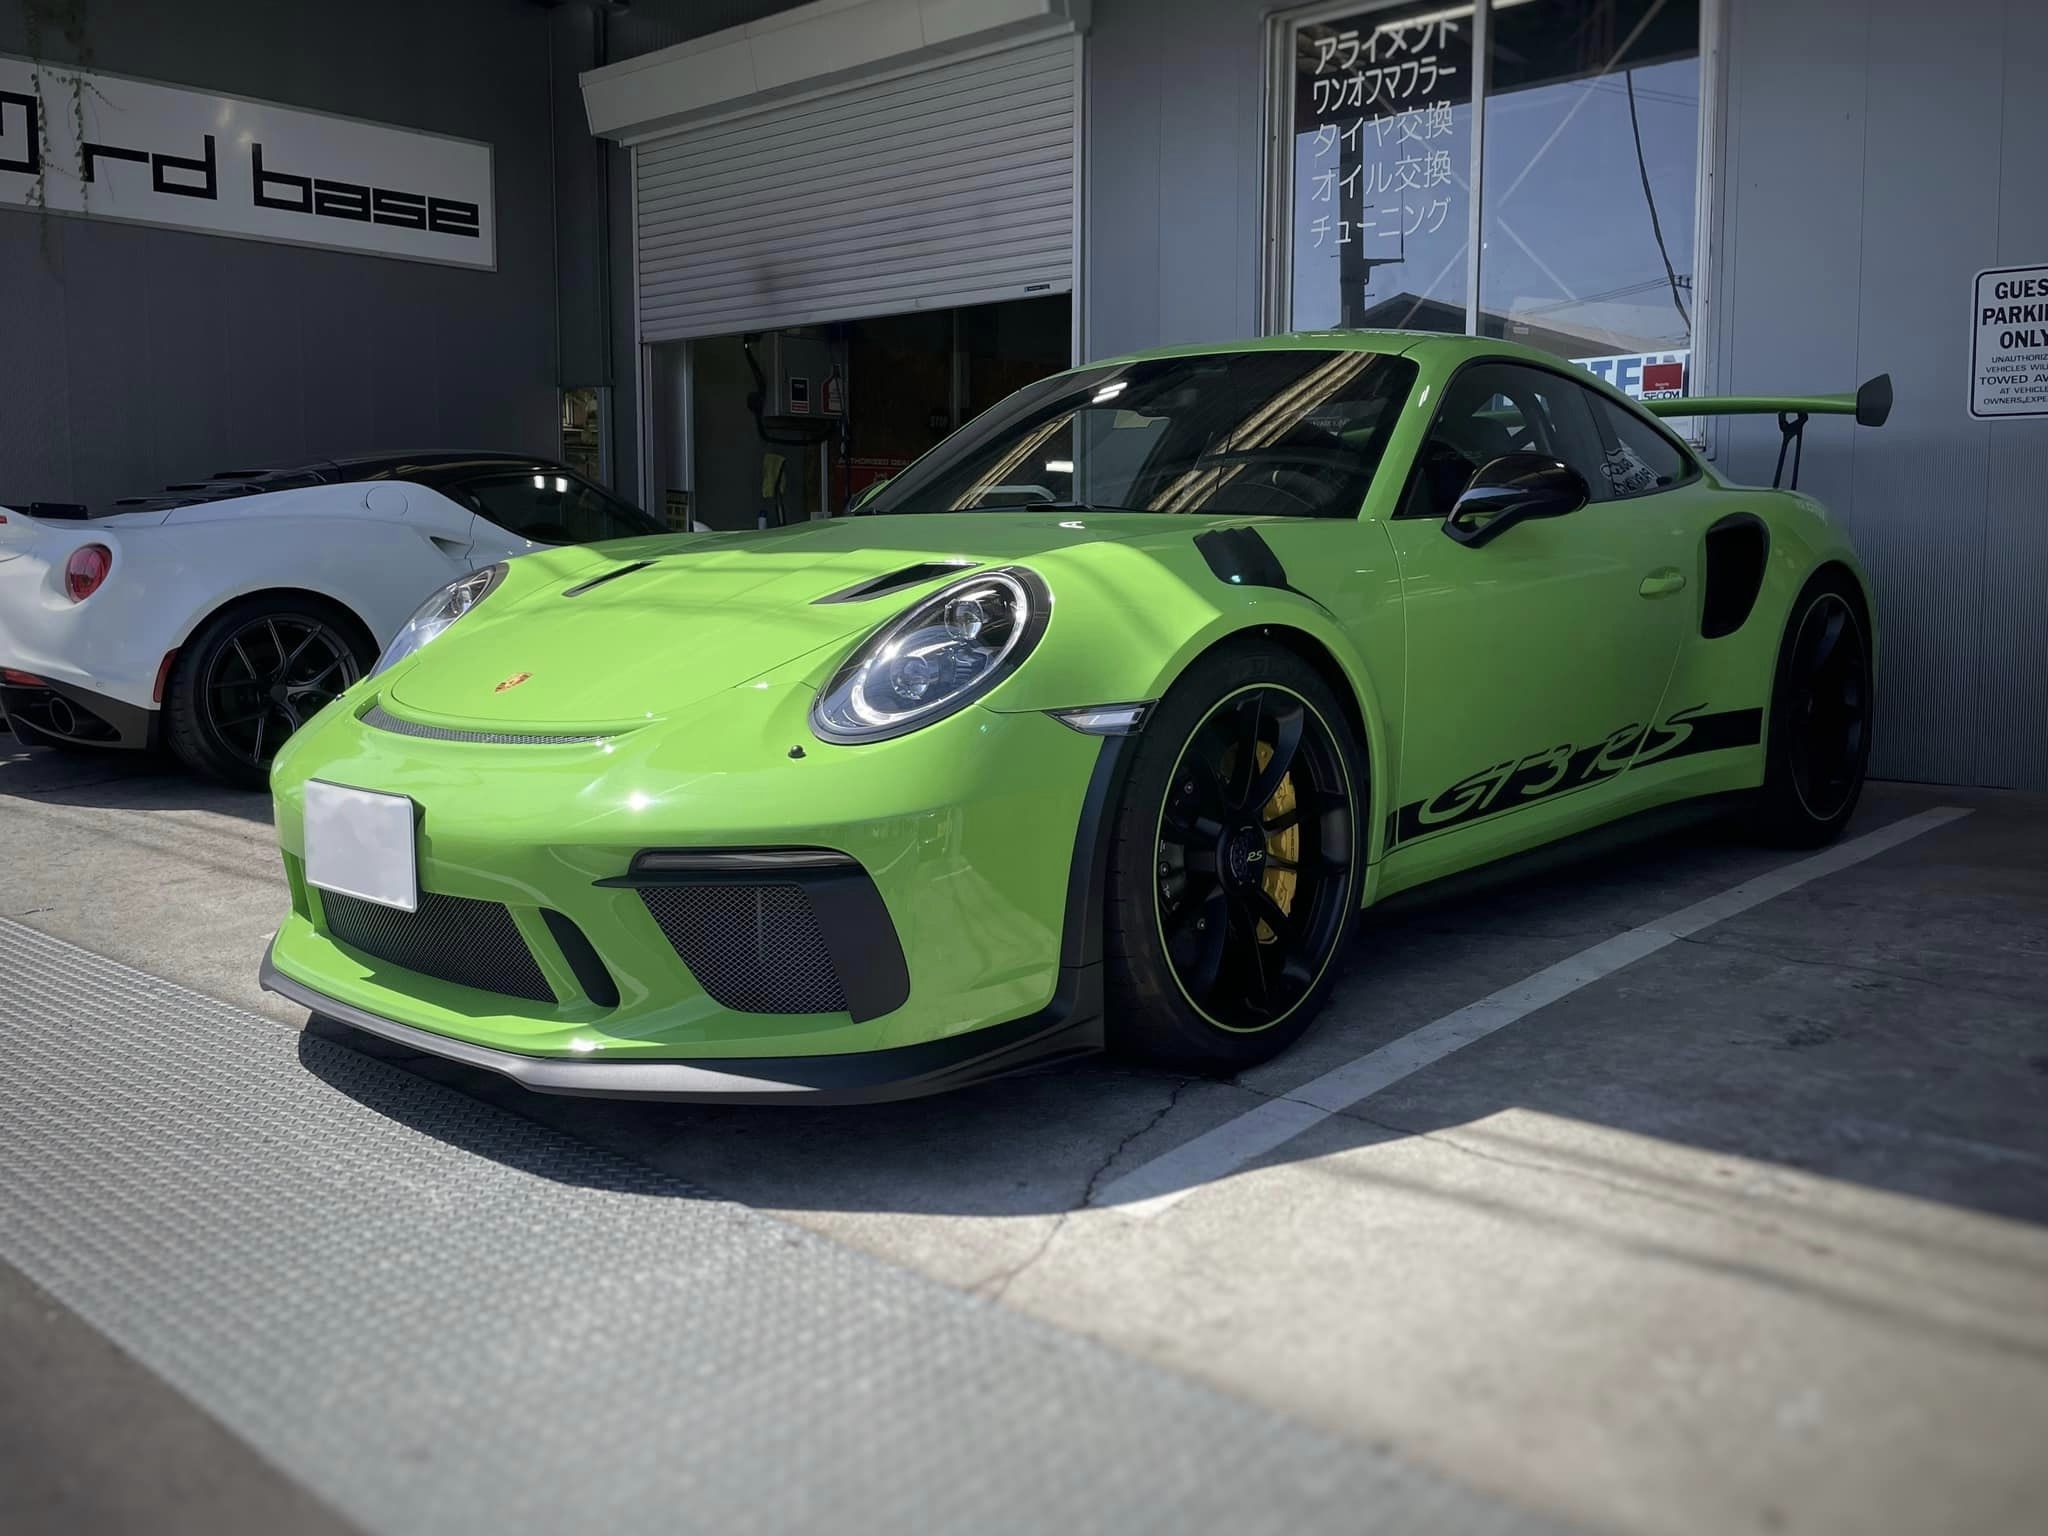 991.2GT3RS シートアダプター取付！